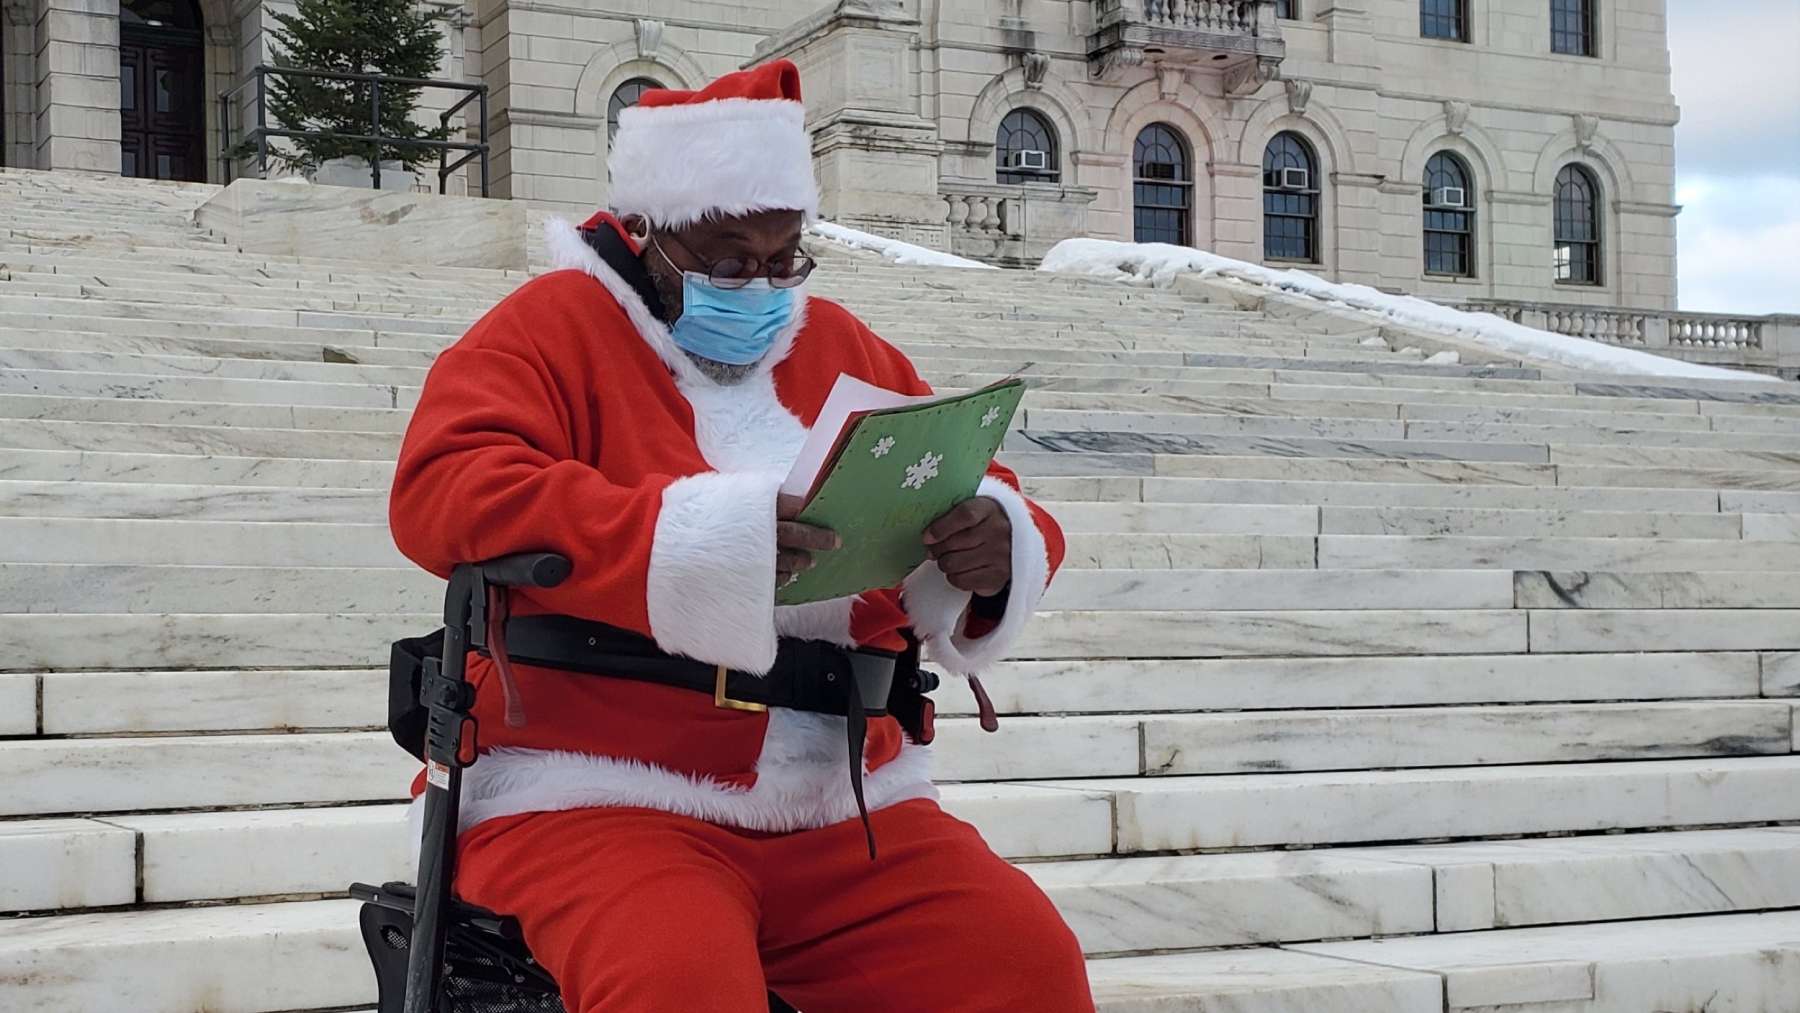 Rhode Island News: Santa Claus visits State House to advocate for the evicted and housing insecure